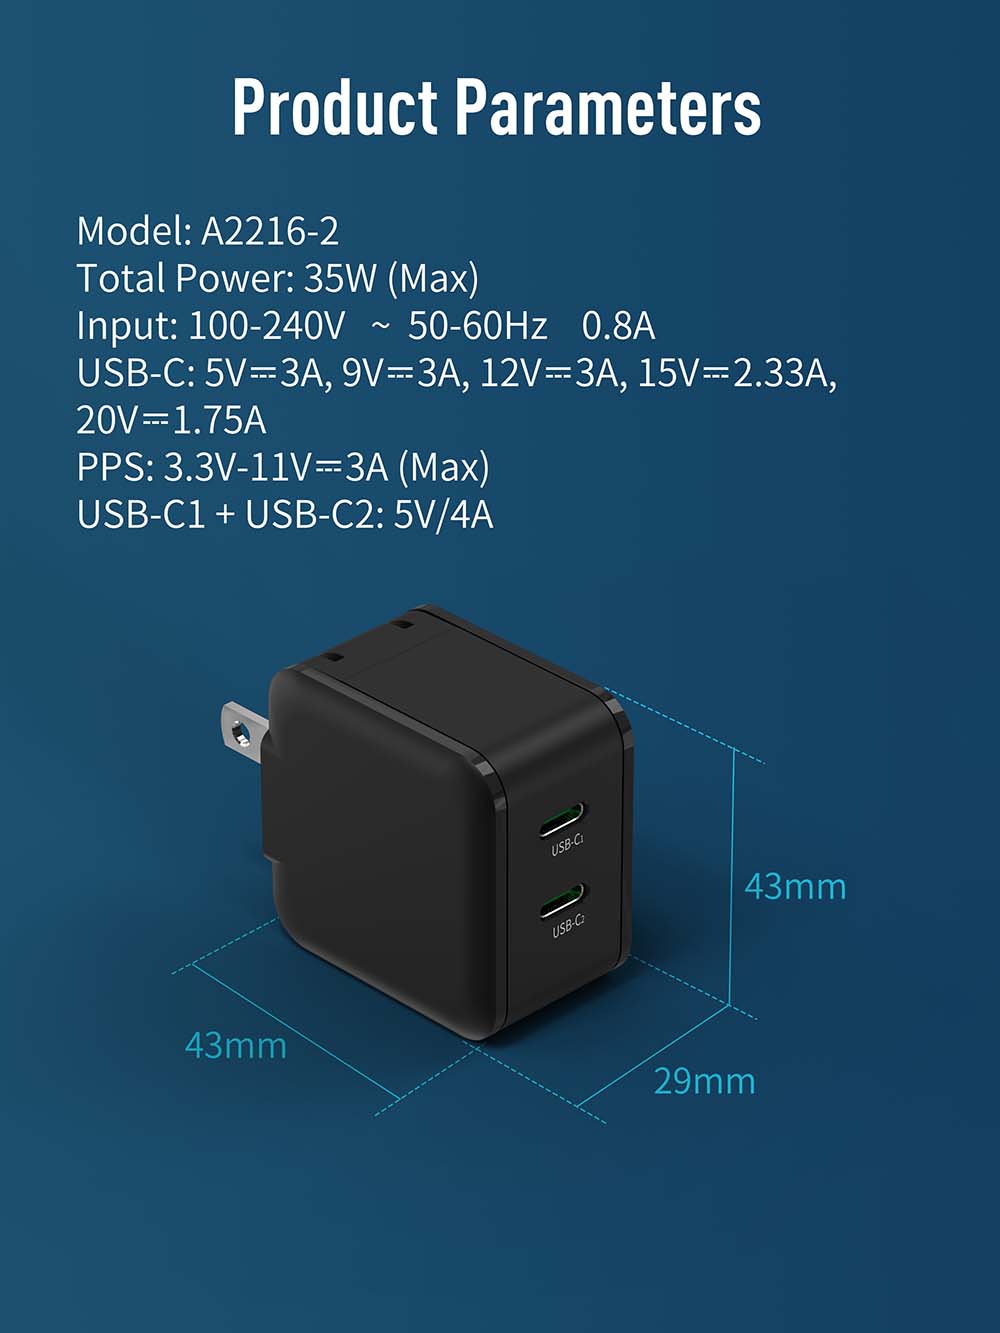 A2216-2(35W) dual usb c GaN charger Huwder specification